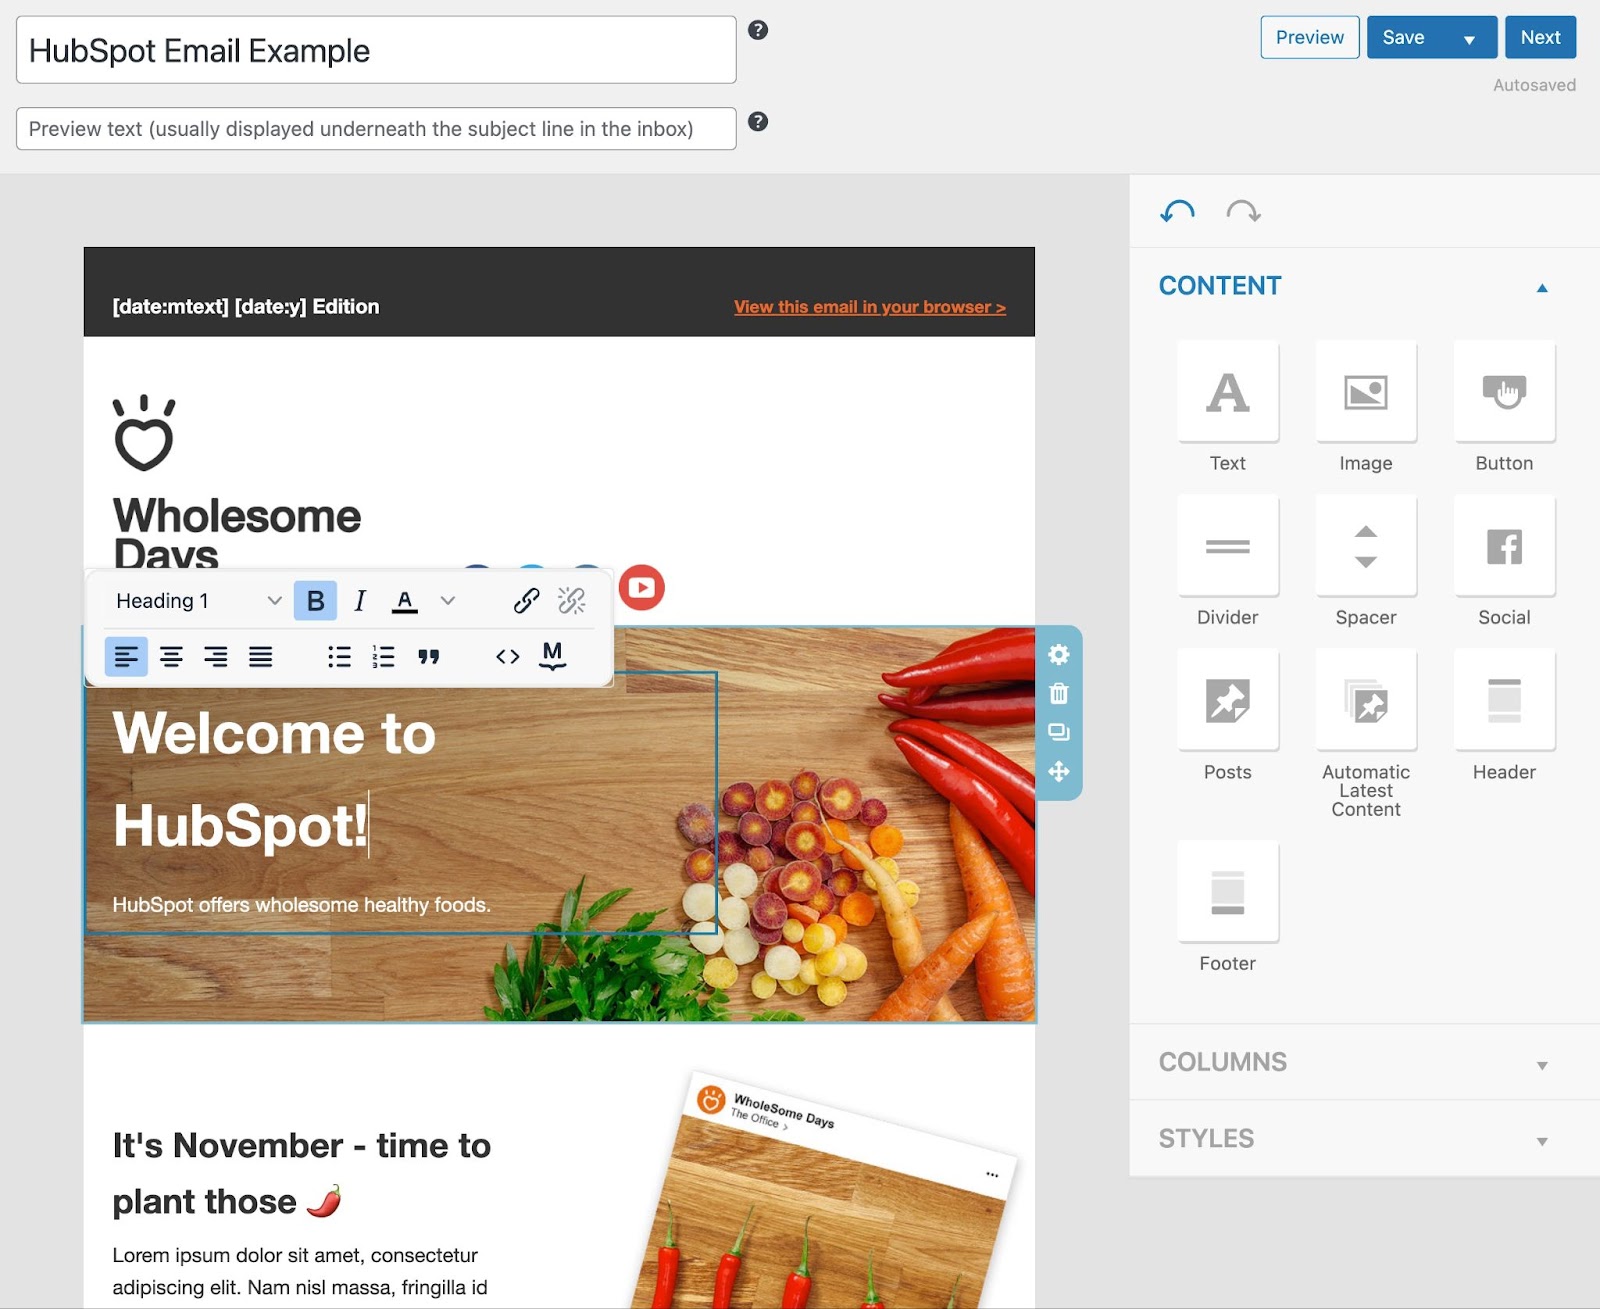 WordPress email marketing plugins, the MailPoet email editor